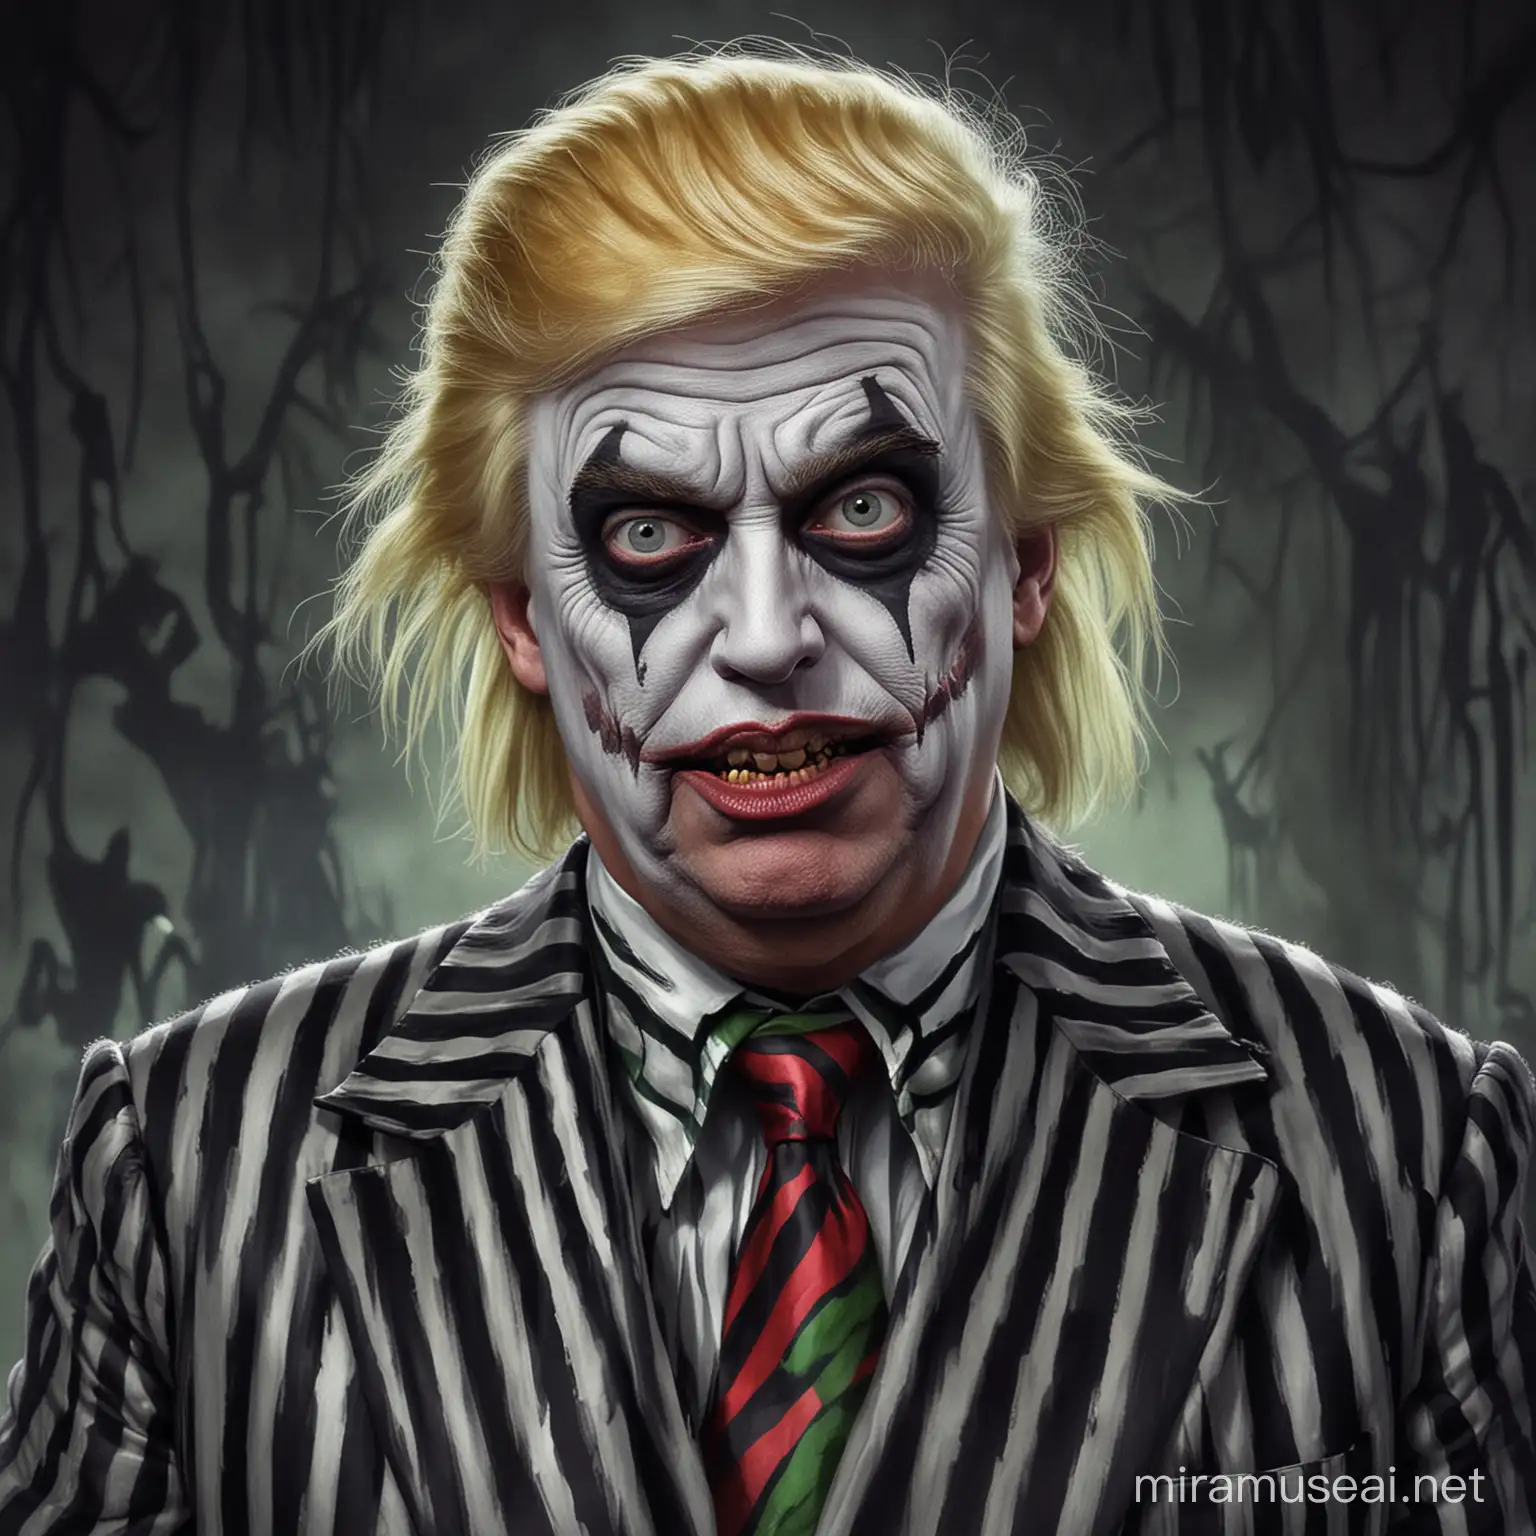 Donald Trump Portrayed as Beetlejuice for a Comedic Twist